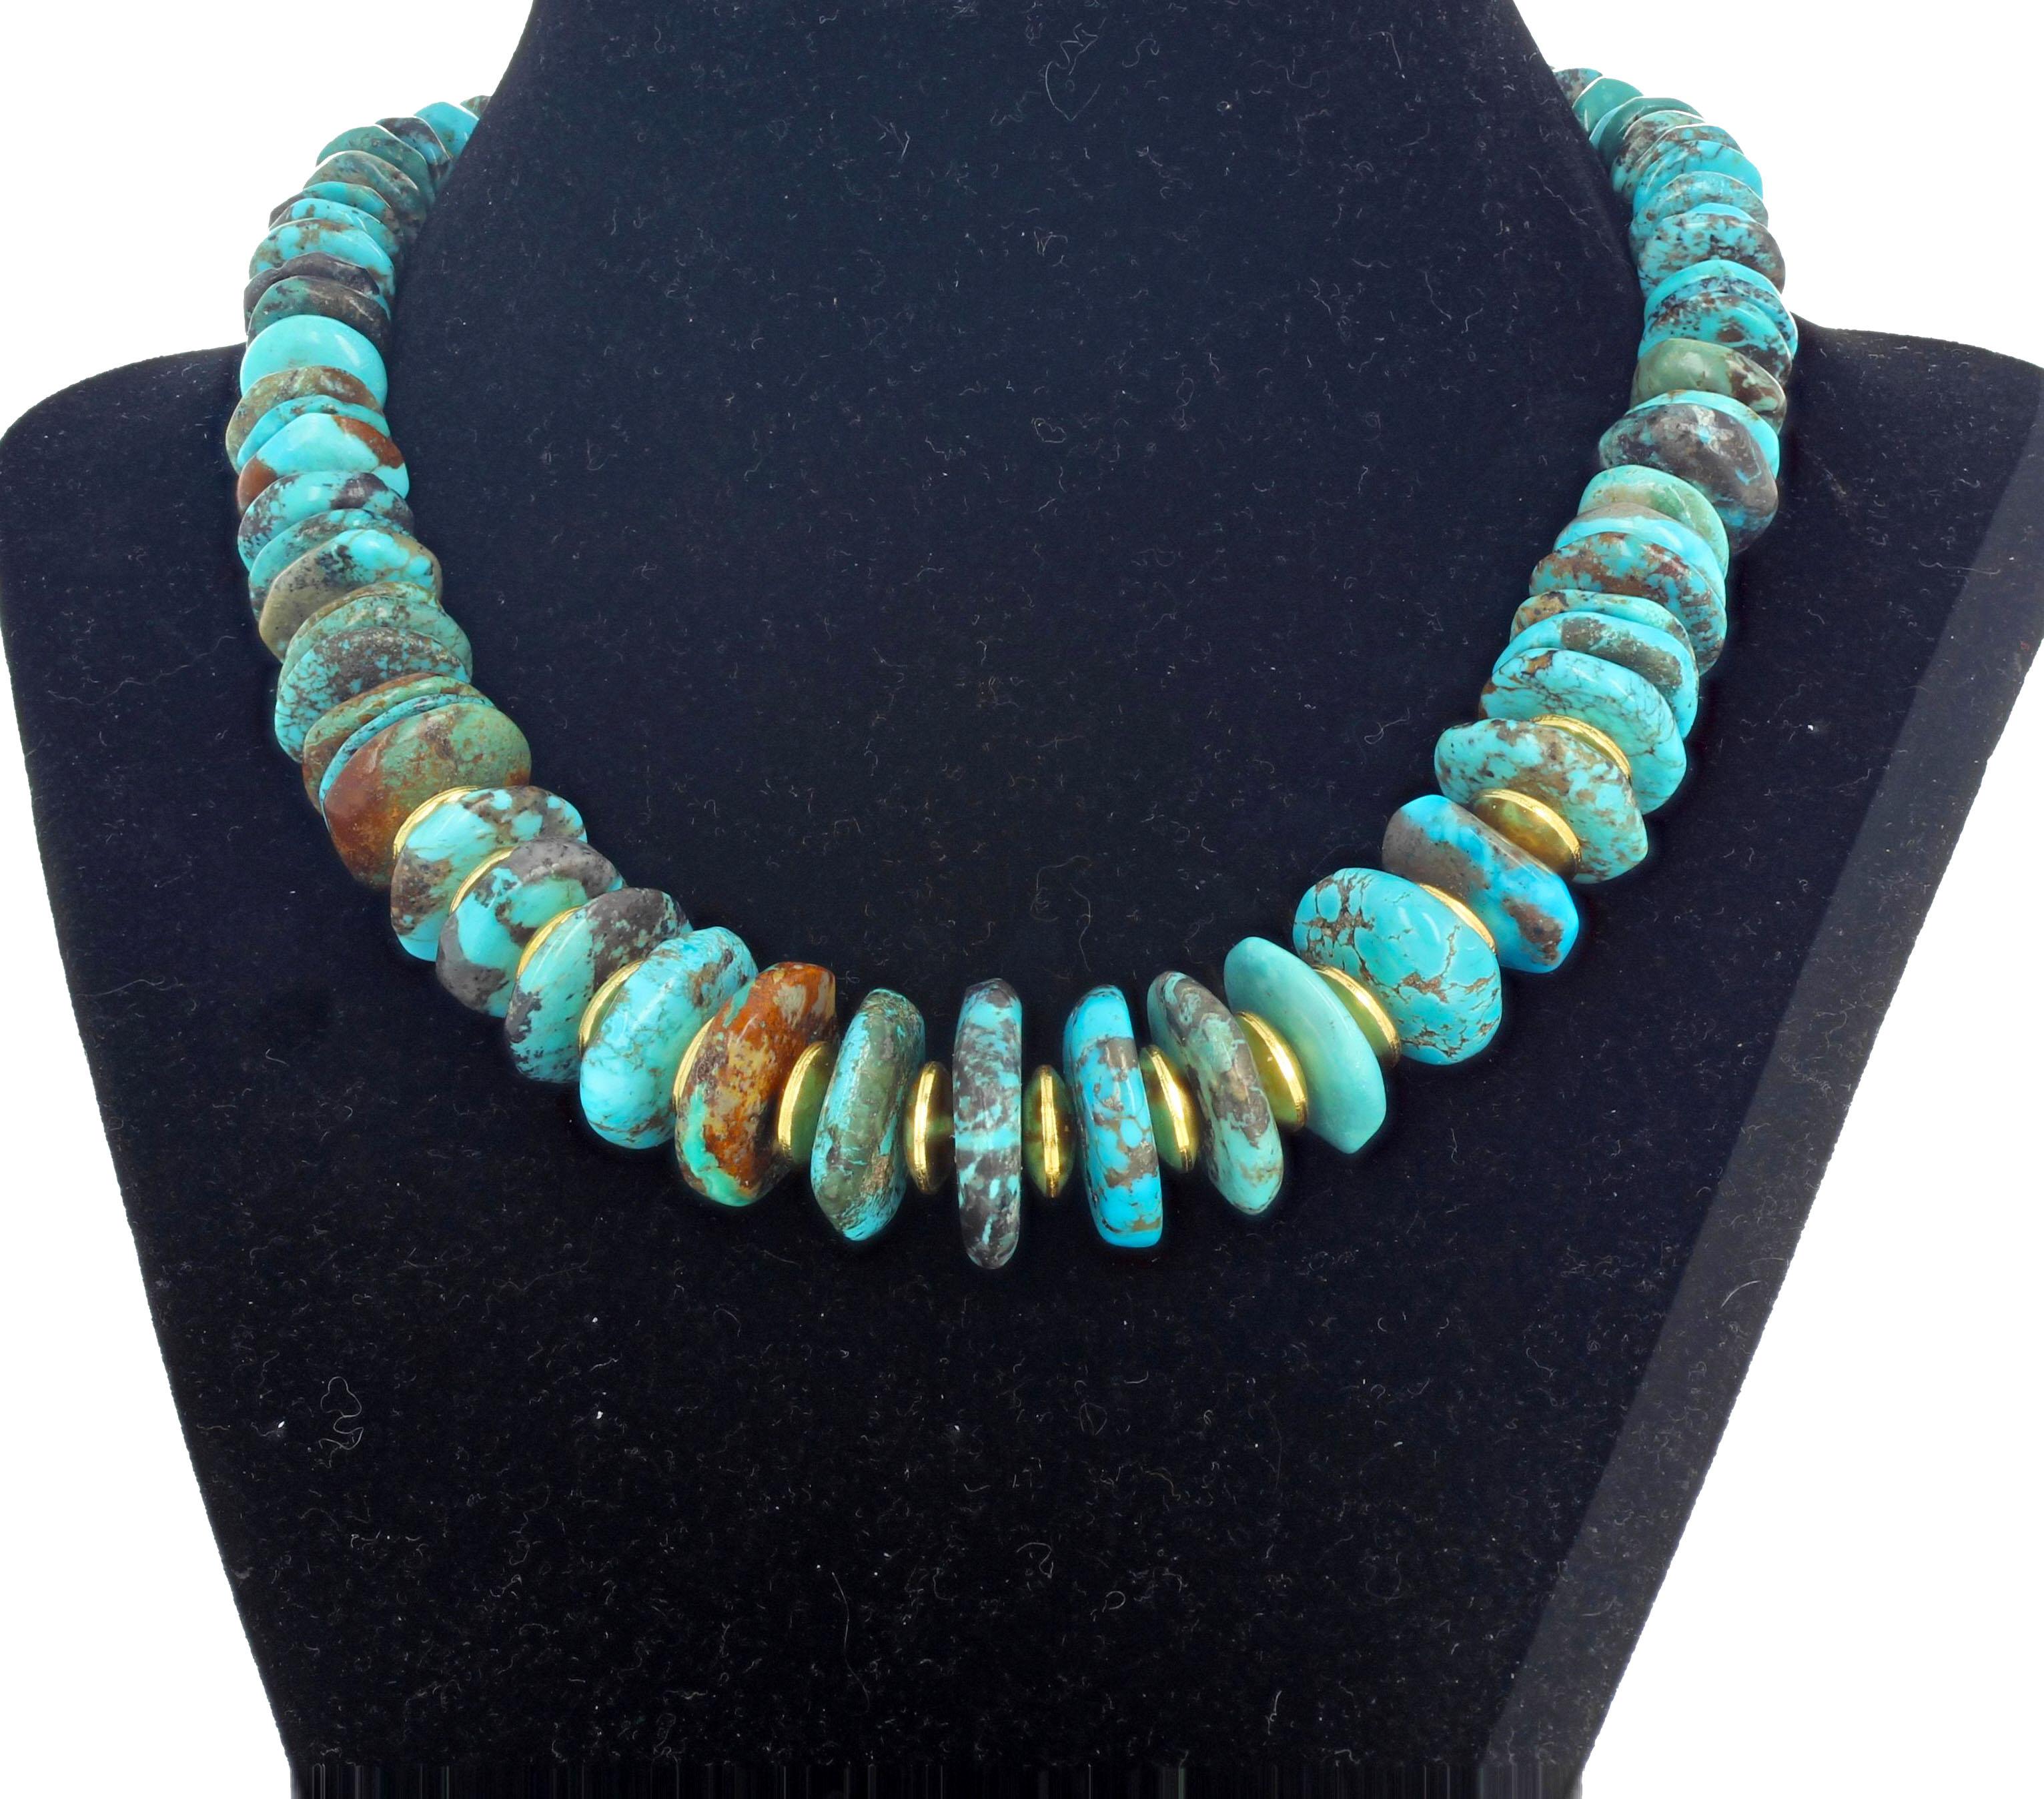 Stunningly beautiful natural Turquoise - largest one is approximately 22mm - enhanced with Vermeil - gold plated sterling silver - rondels set with this lovely gold plated clasp enhanced with real diamonds.  The Turquoise necklace is 16.5 inches